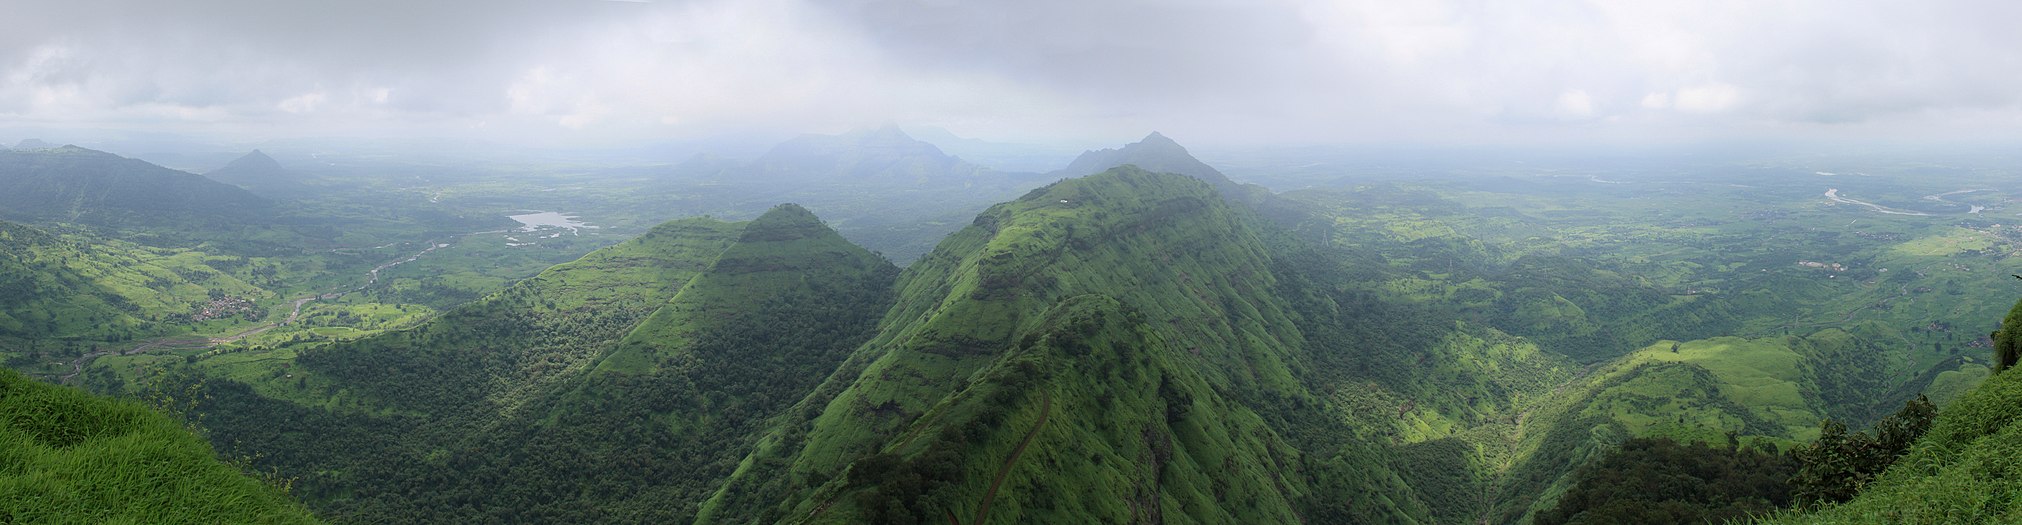 Western Ghats during the dry and monsoon seasons by Arne Hückelheim, two of our newest featured pictures.